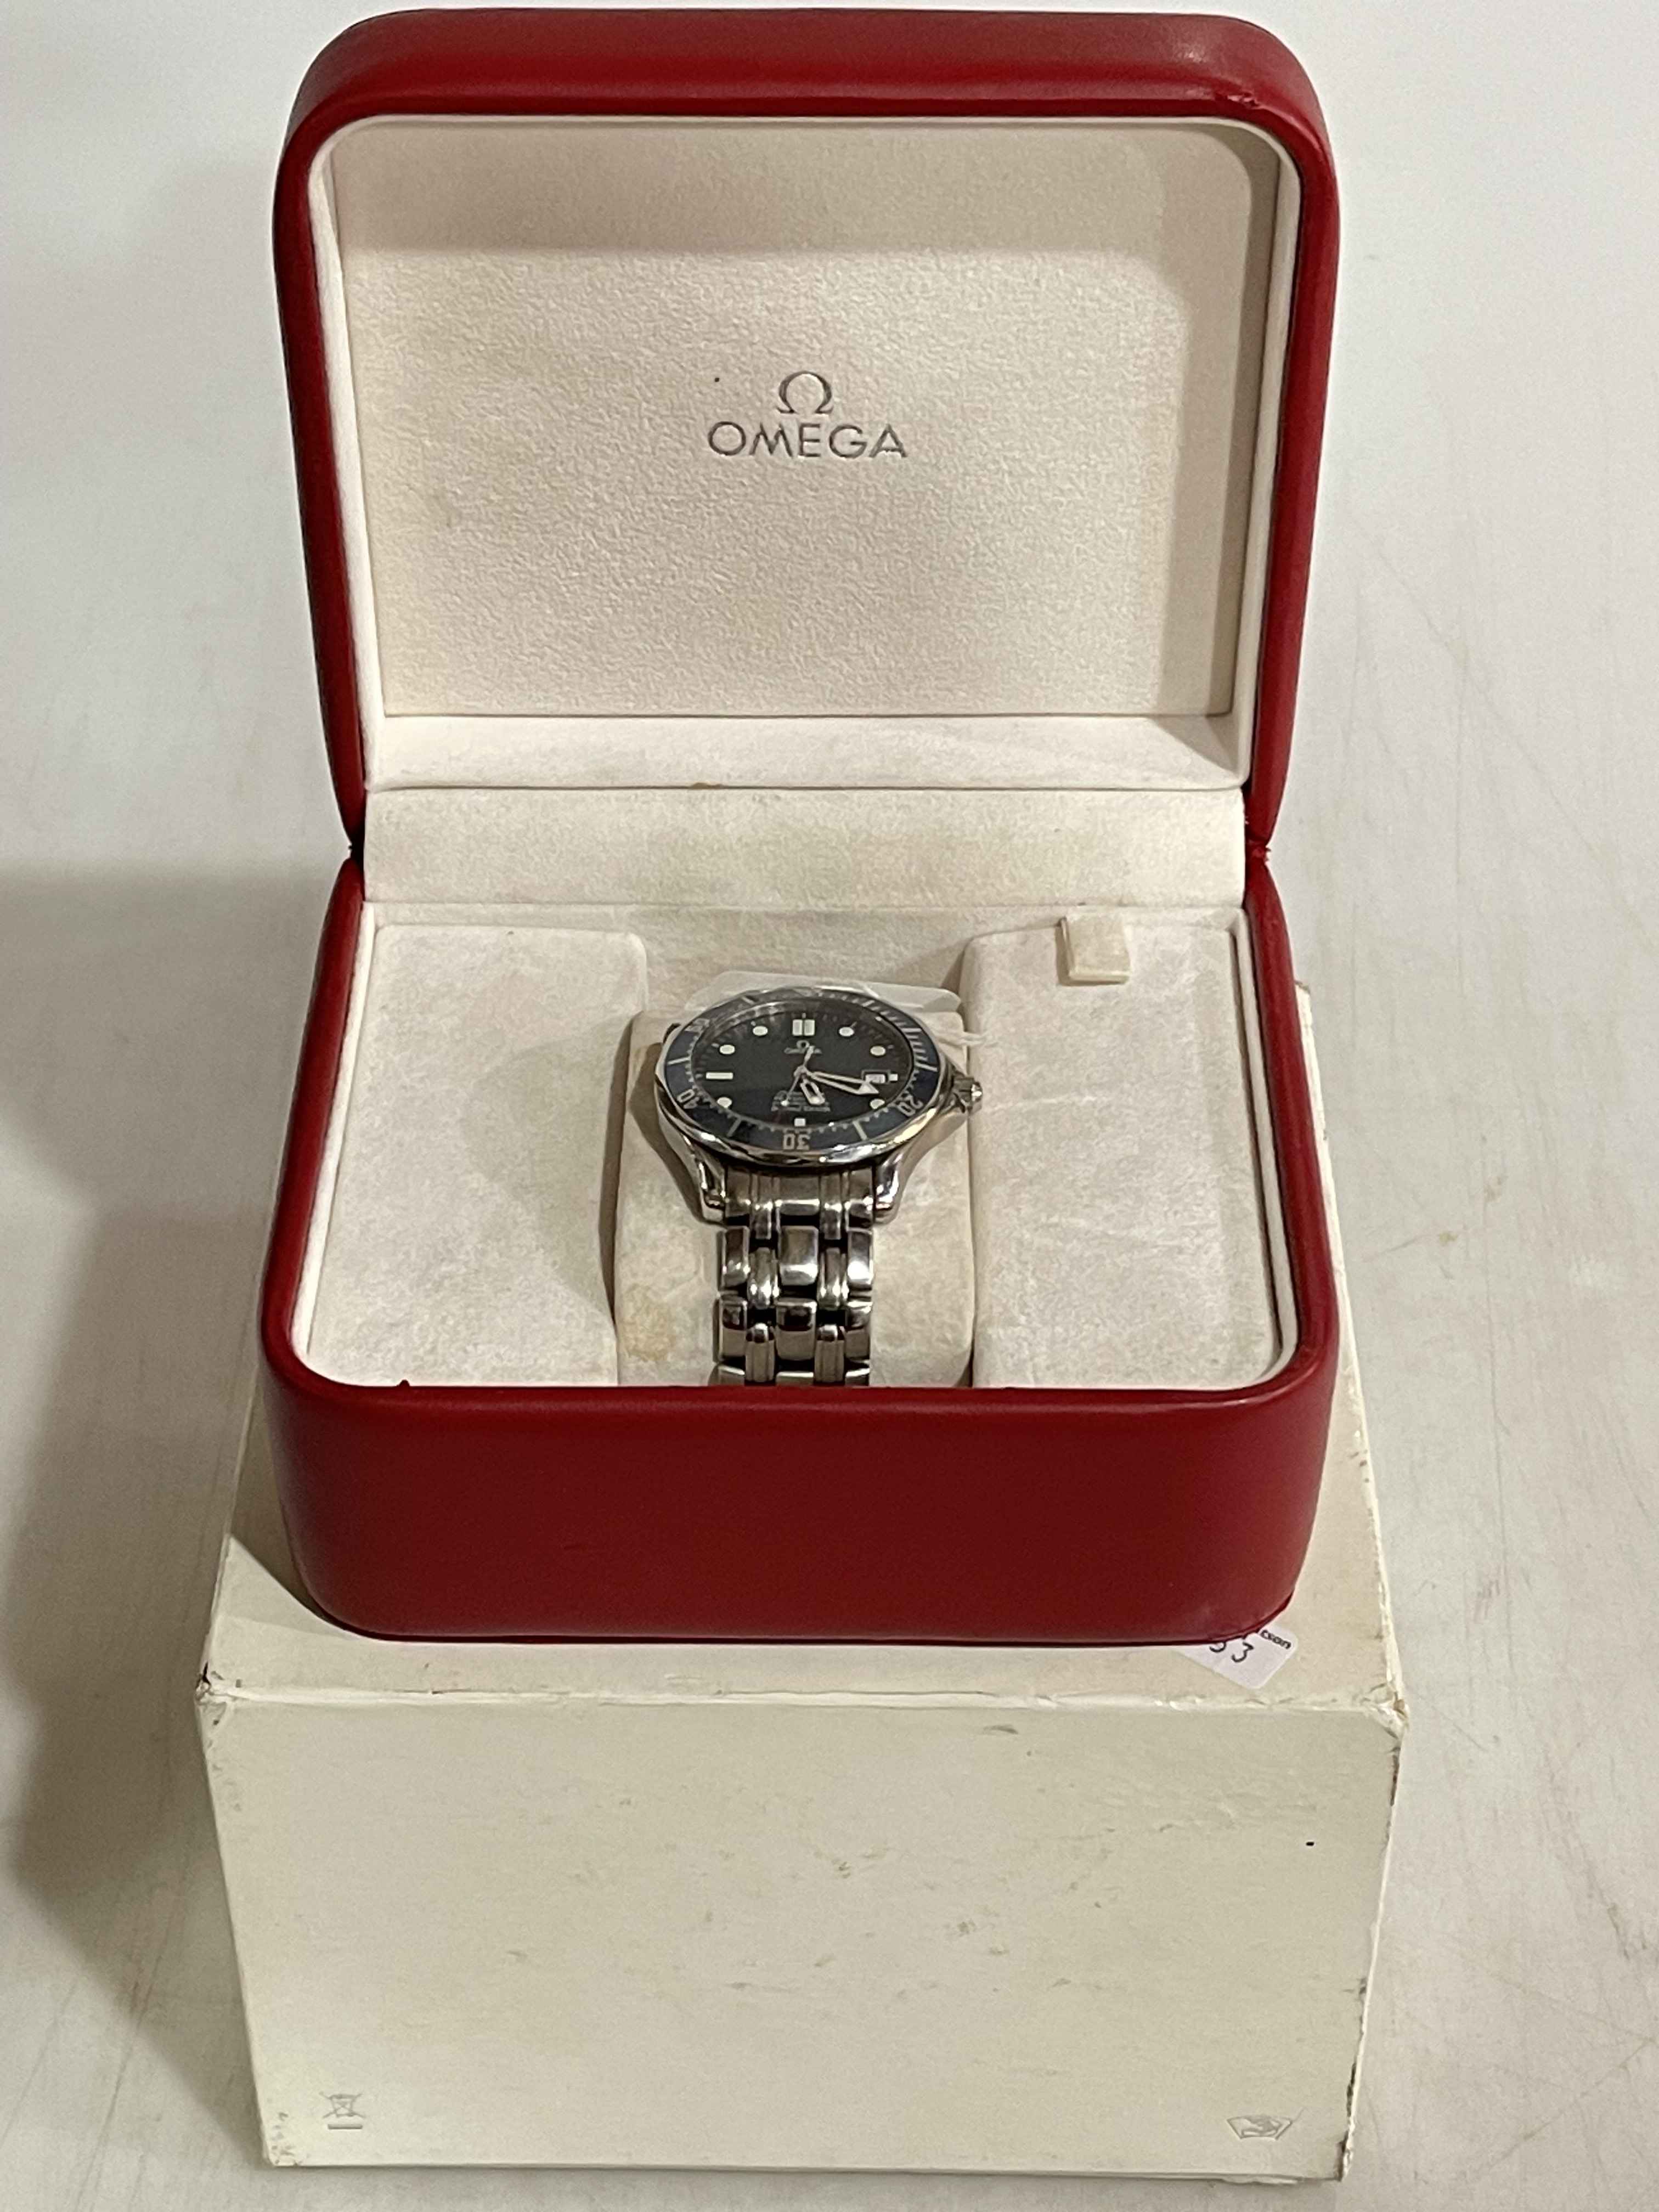 Omega Seamaster Professional Chronometer 300m, with box and some papers.